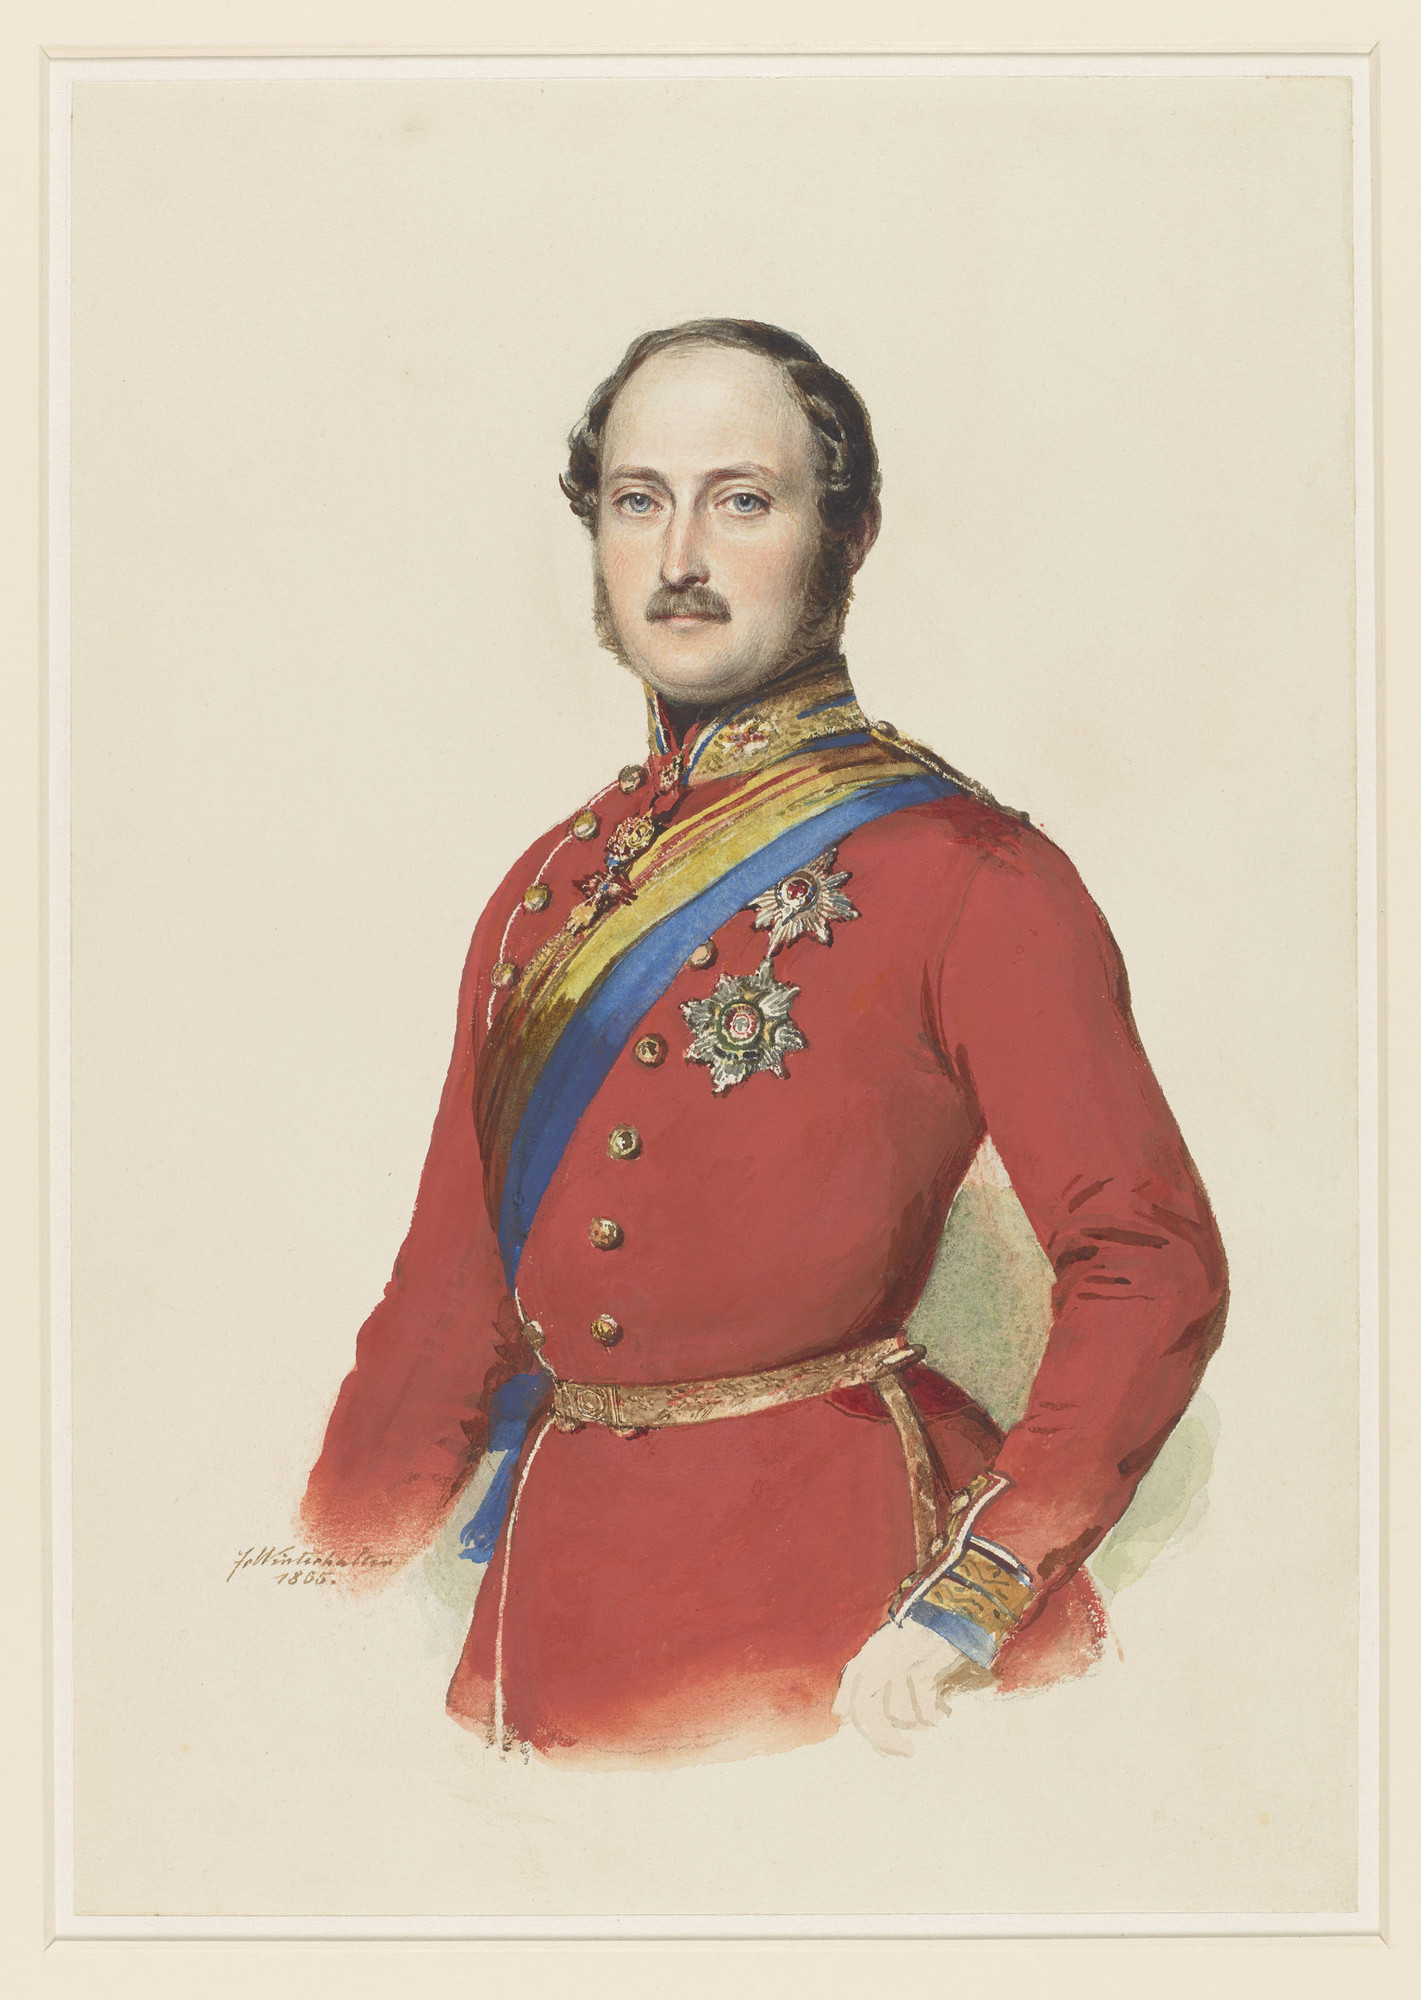 A three-quarter length watercolour portrait of Prince Albert, facing front, wearing the uniform of the Grenadier Guards, the ribbon and star of the Garter, the star of Bath, the badge of Golden Fleece, and the House order of Saxe-Ernst. Signed and dated a